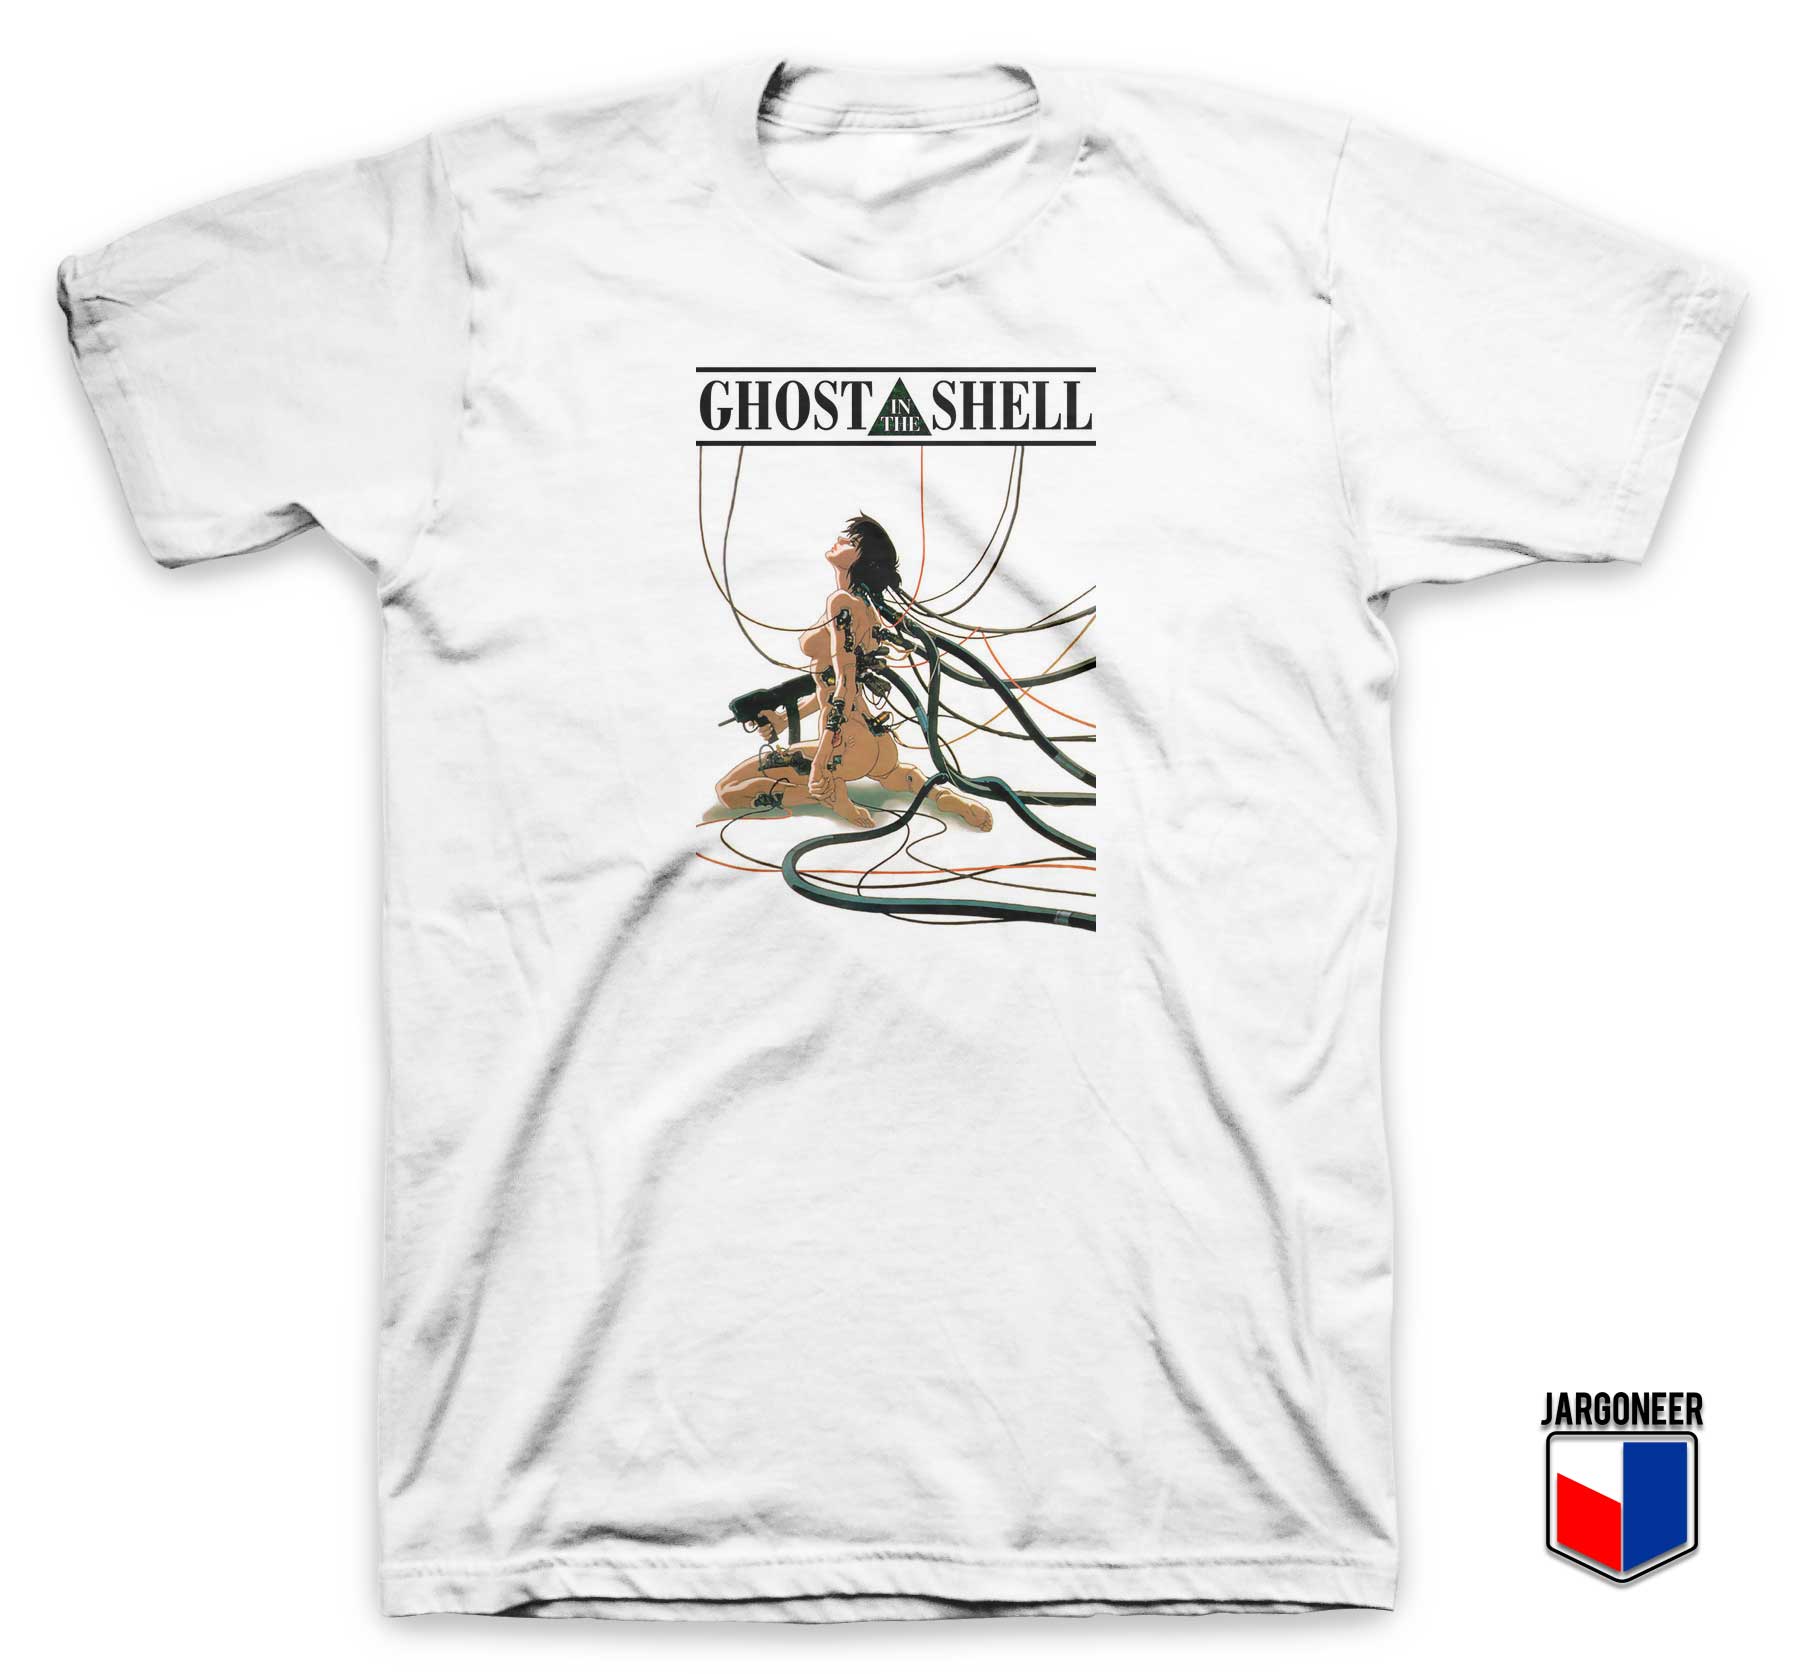 Ghost In The Shell T Shirt - Shop Unique Graphic Cool Shirt Designs